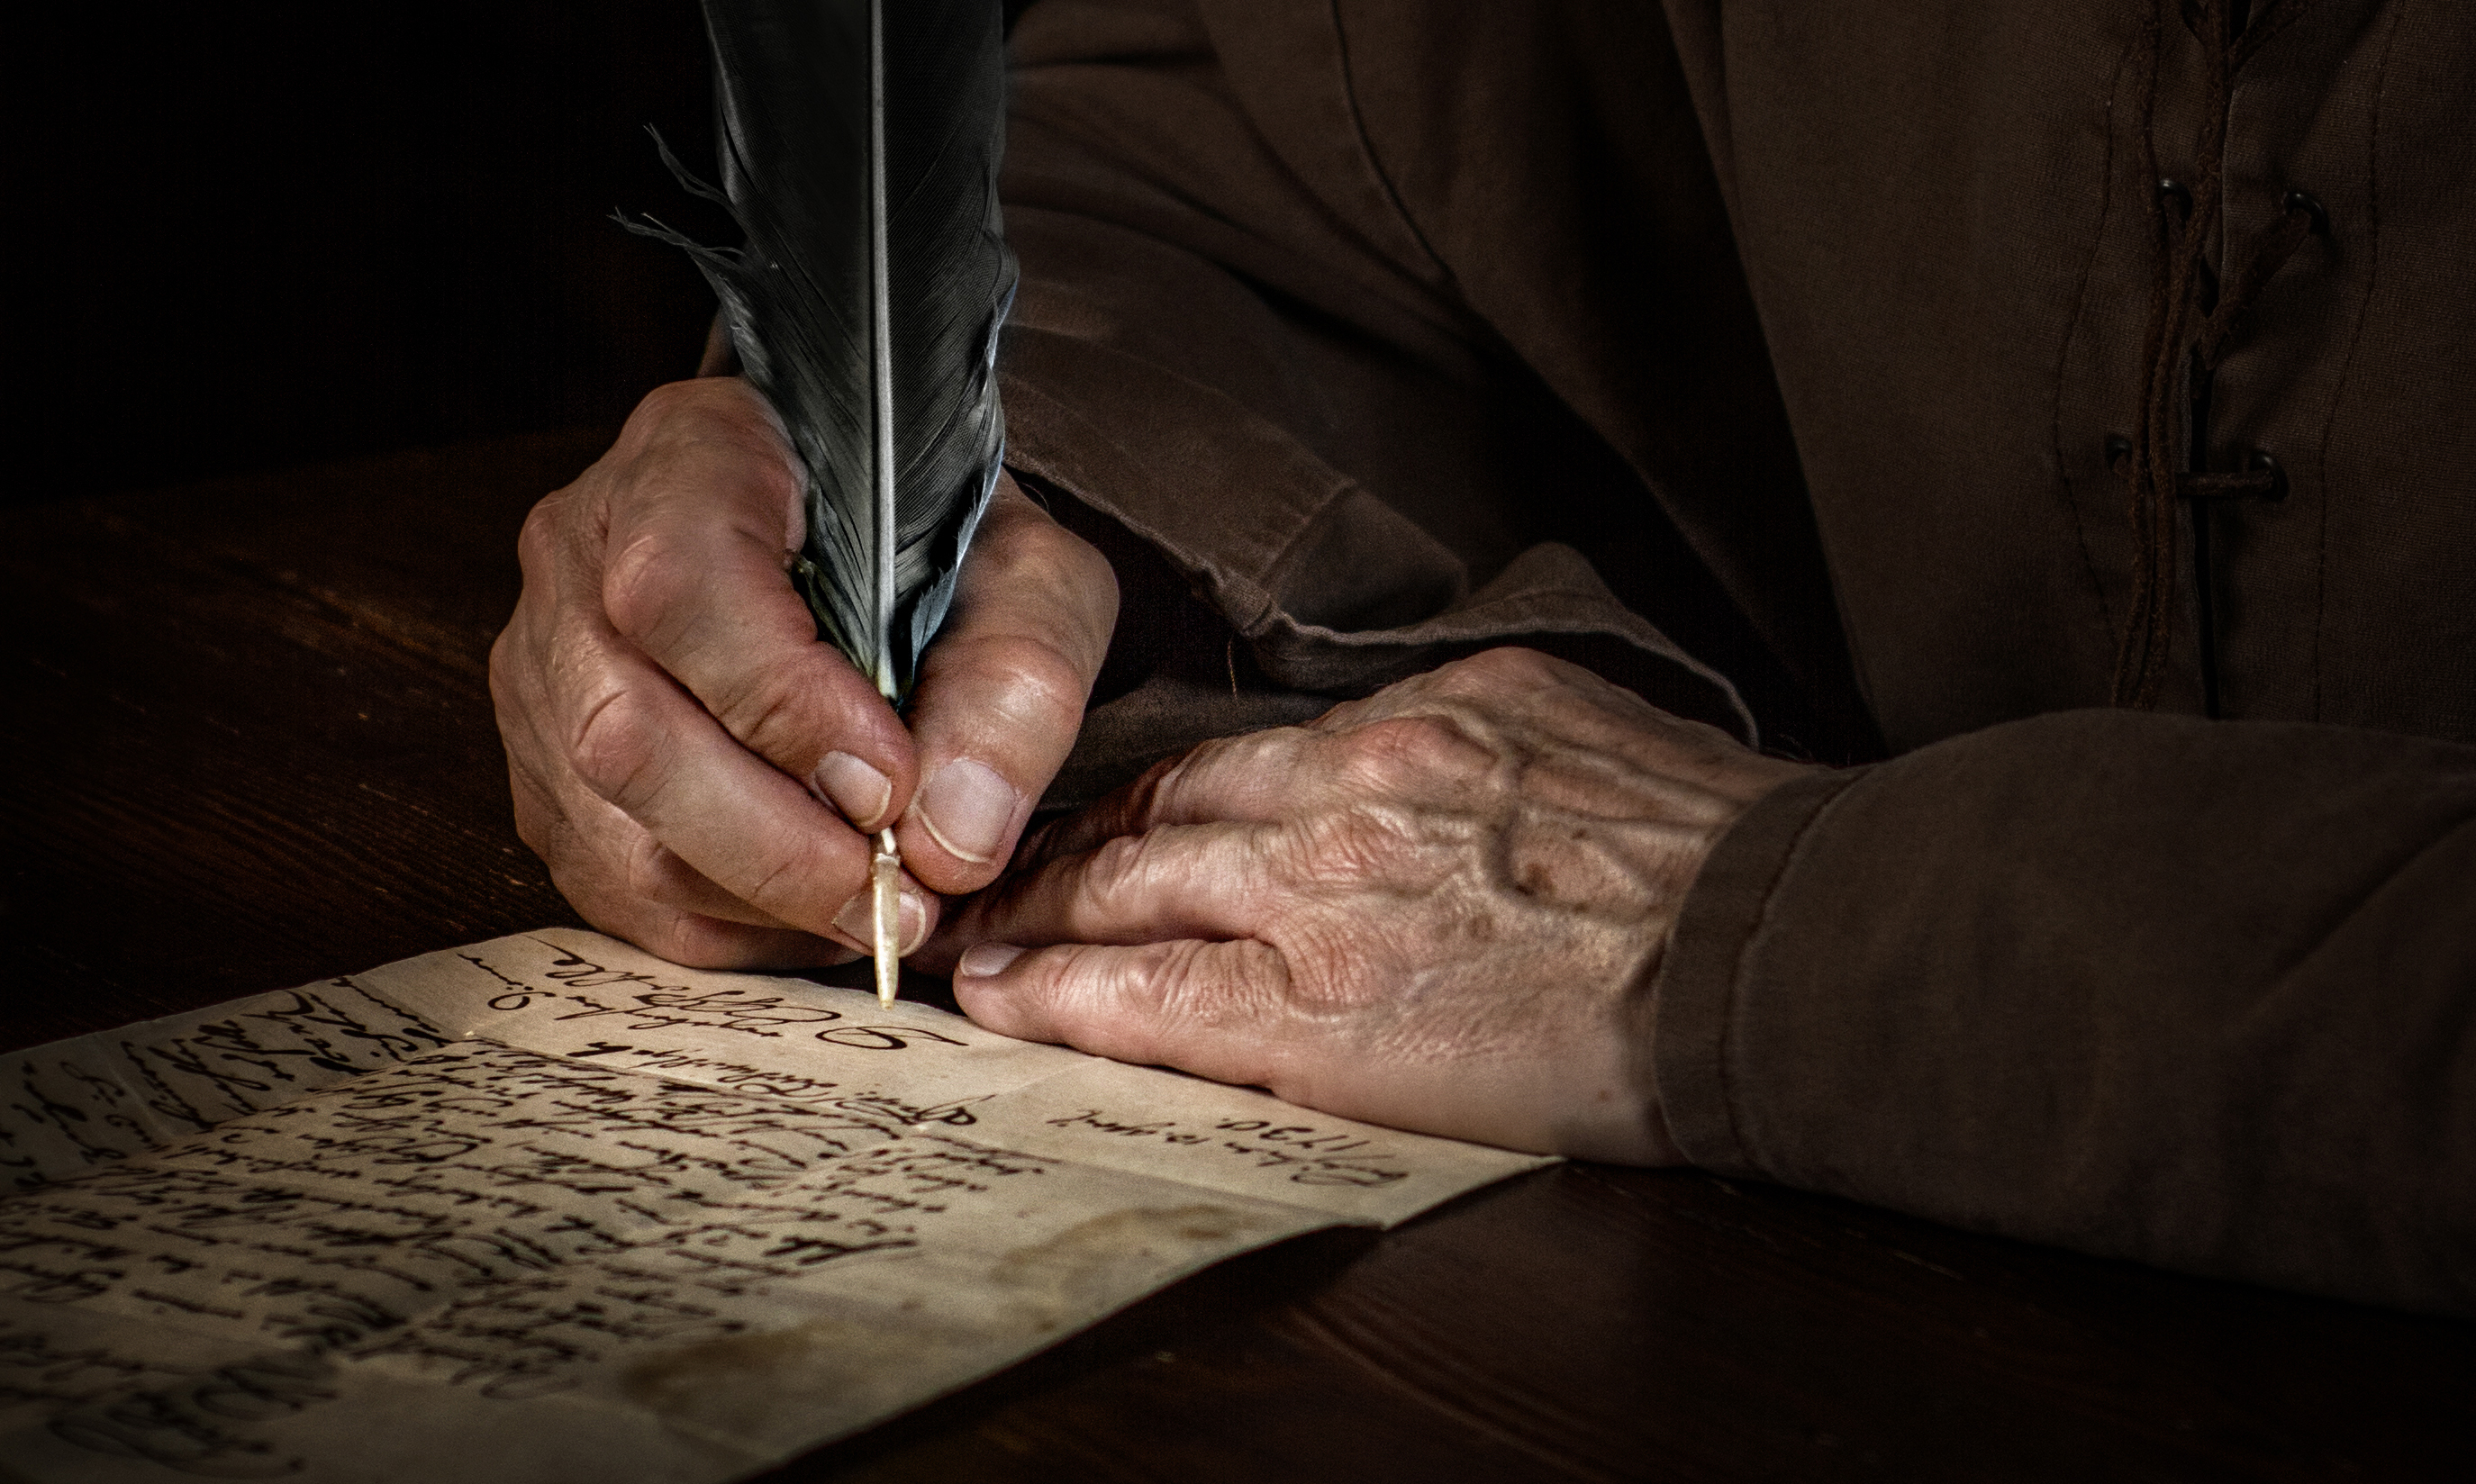 Man is writing in the darkness | Source: Shutterstock.com